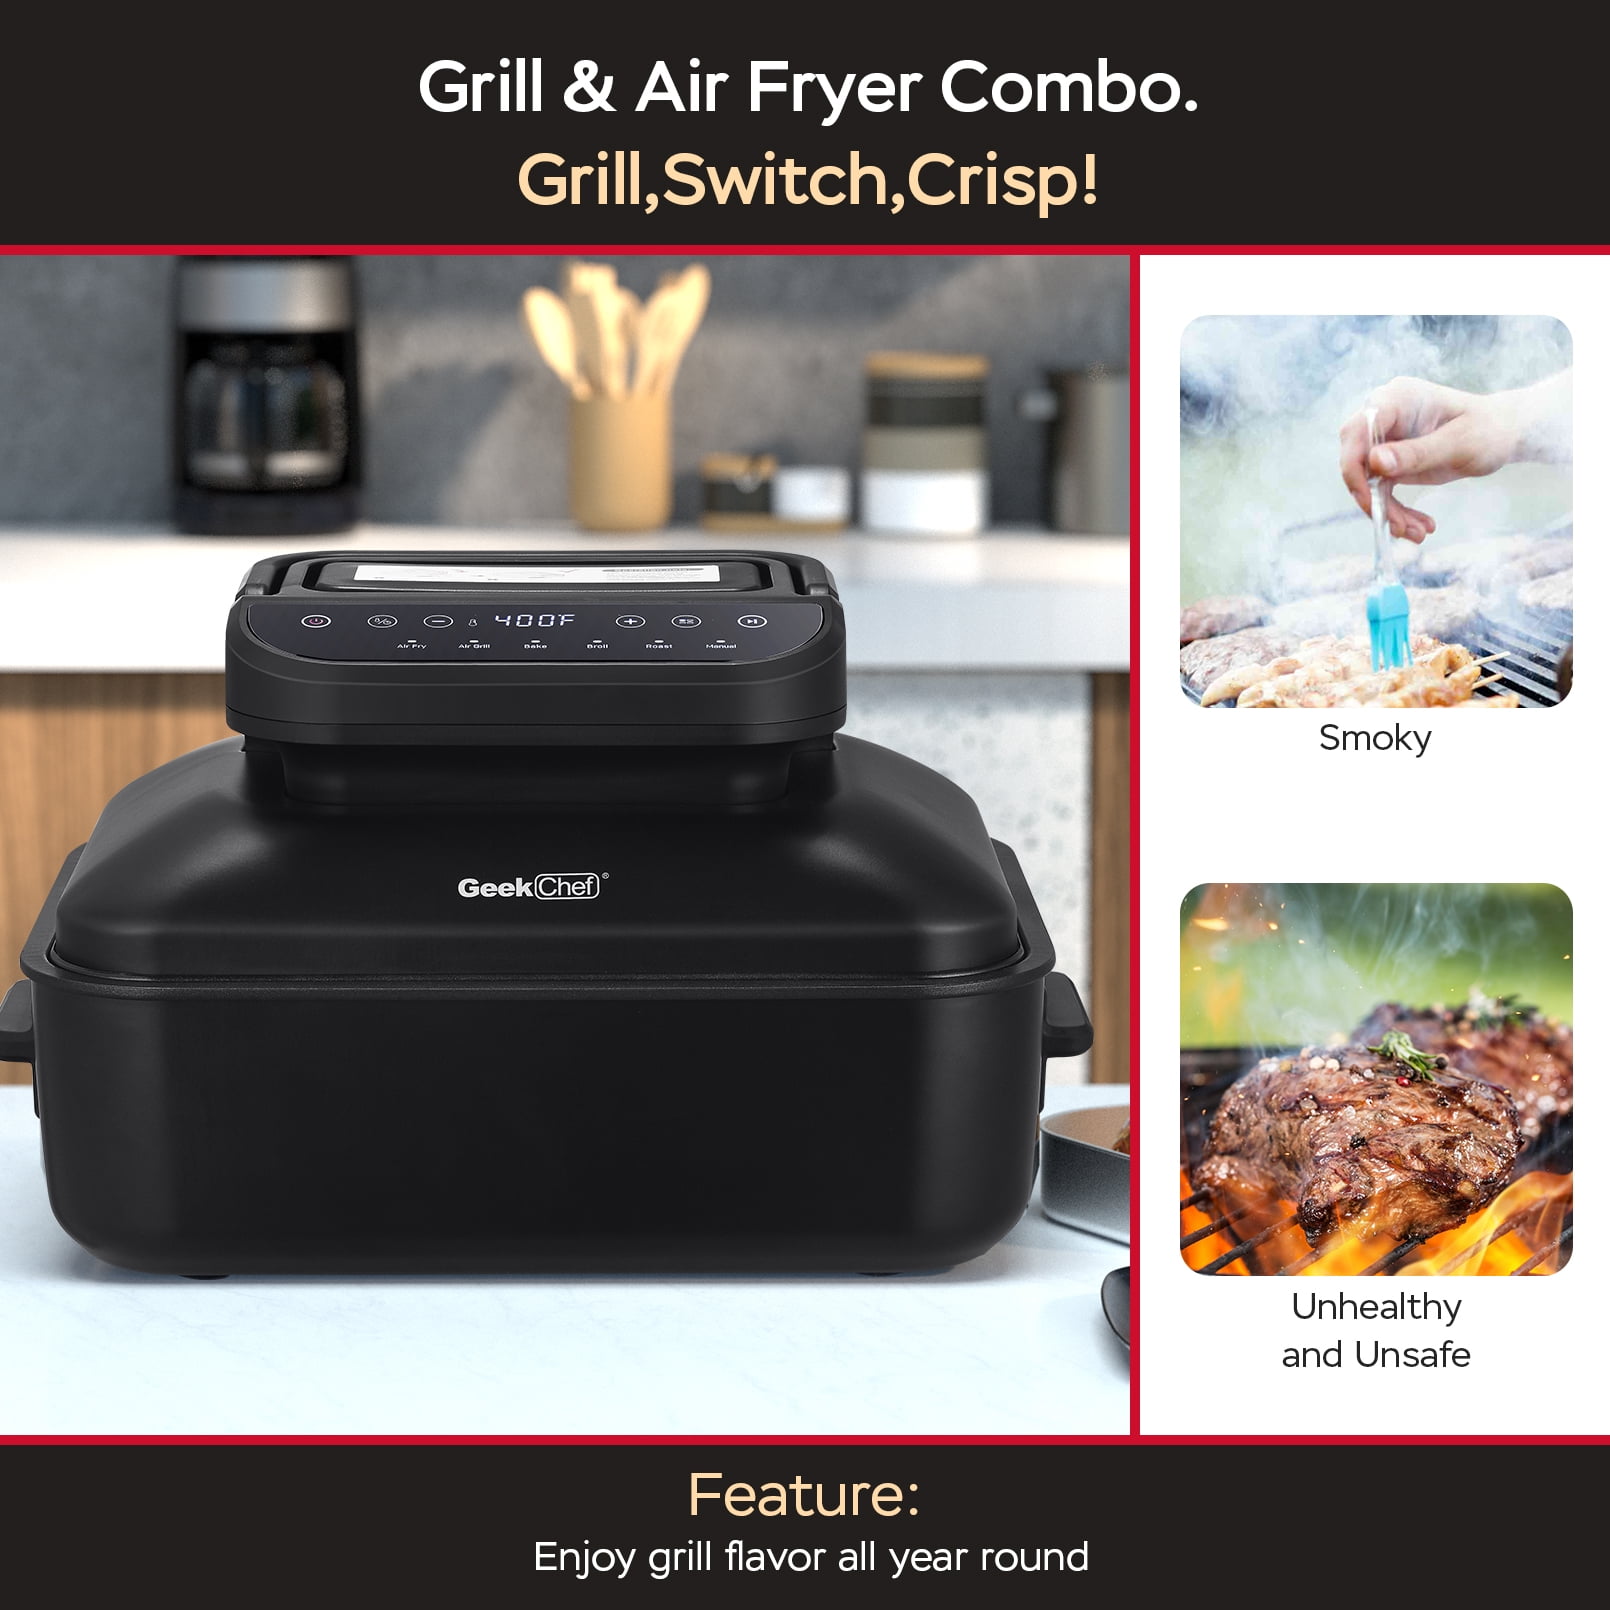 Airfry, Bake, Broil NEW Indoor Smokeless Grill - appliances - by